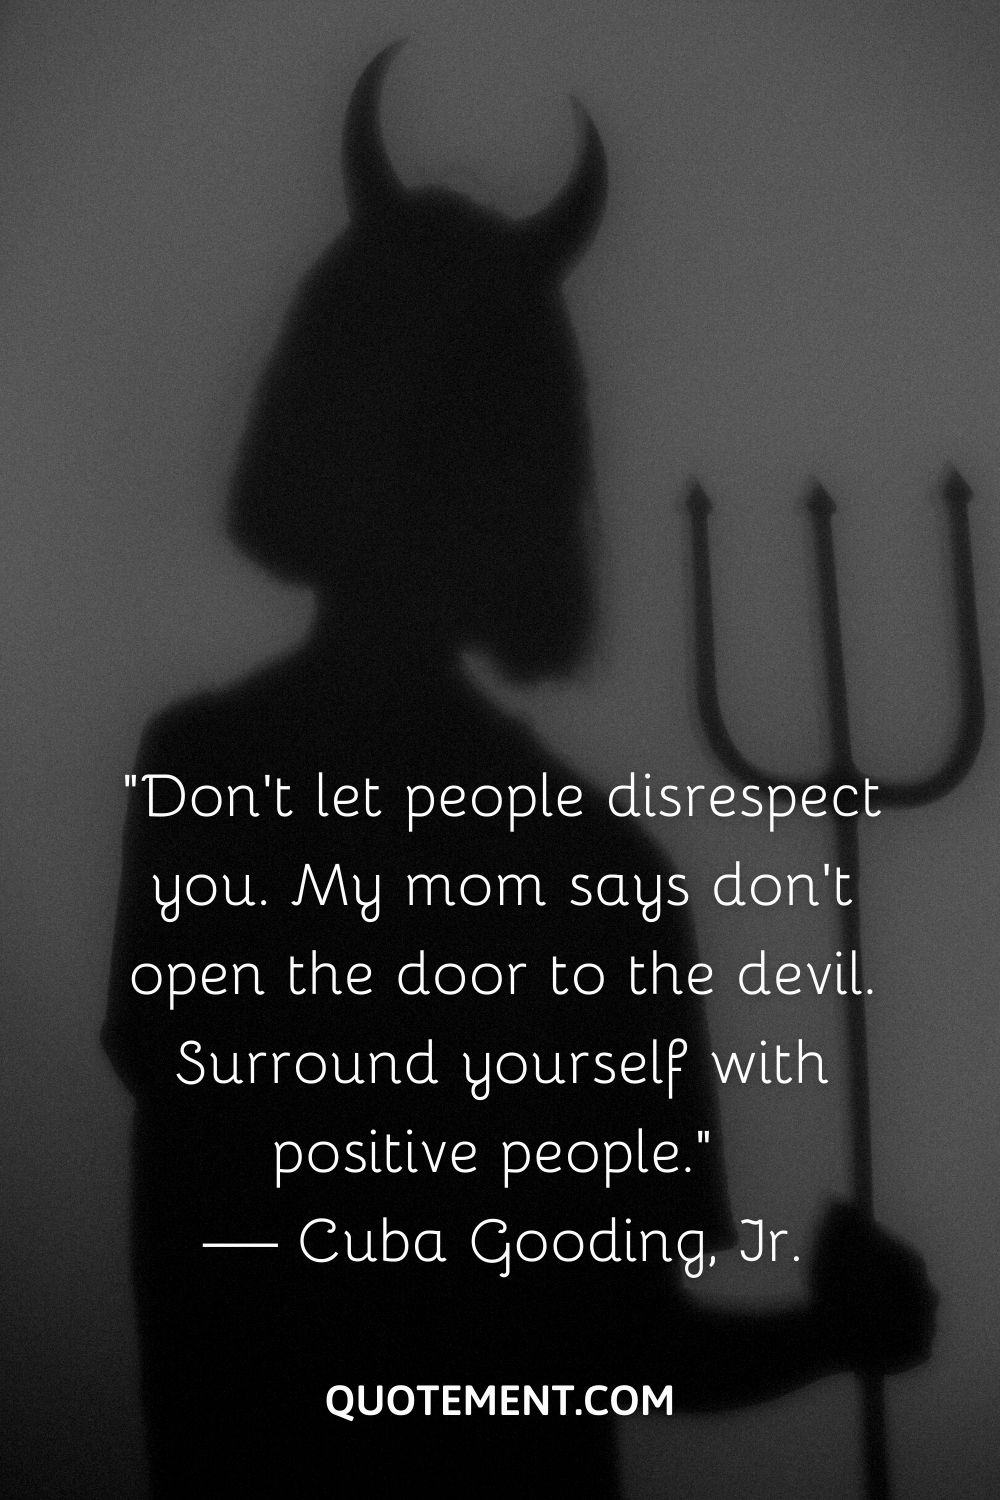 “Don’t let people disrespect you. My mom says don’t open the door to the devil. Surround yourself with positive people.” — Cuba Gooding, Jr.